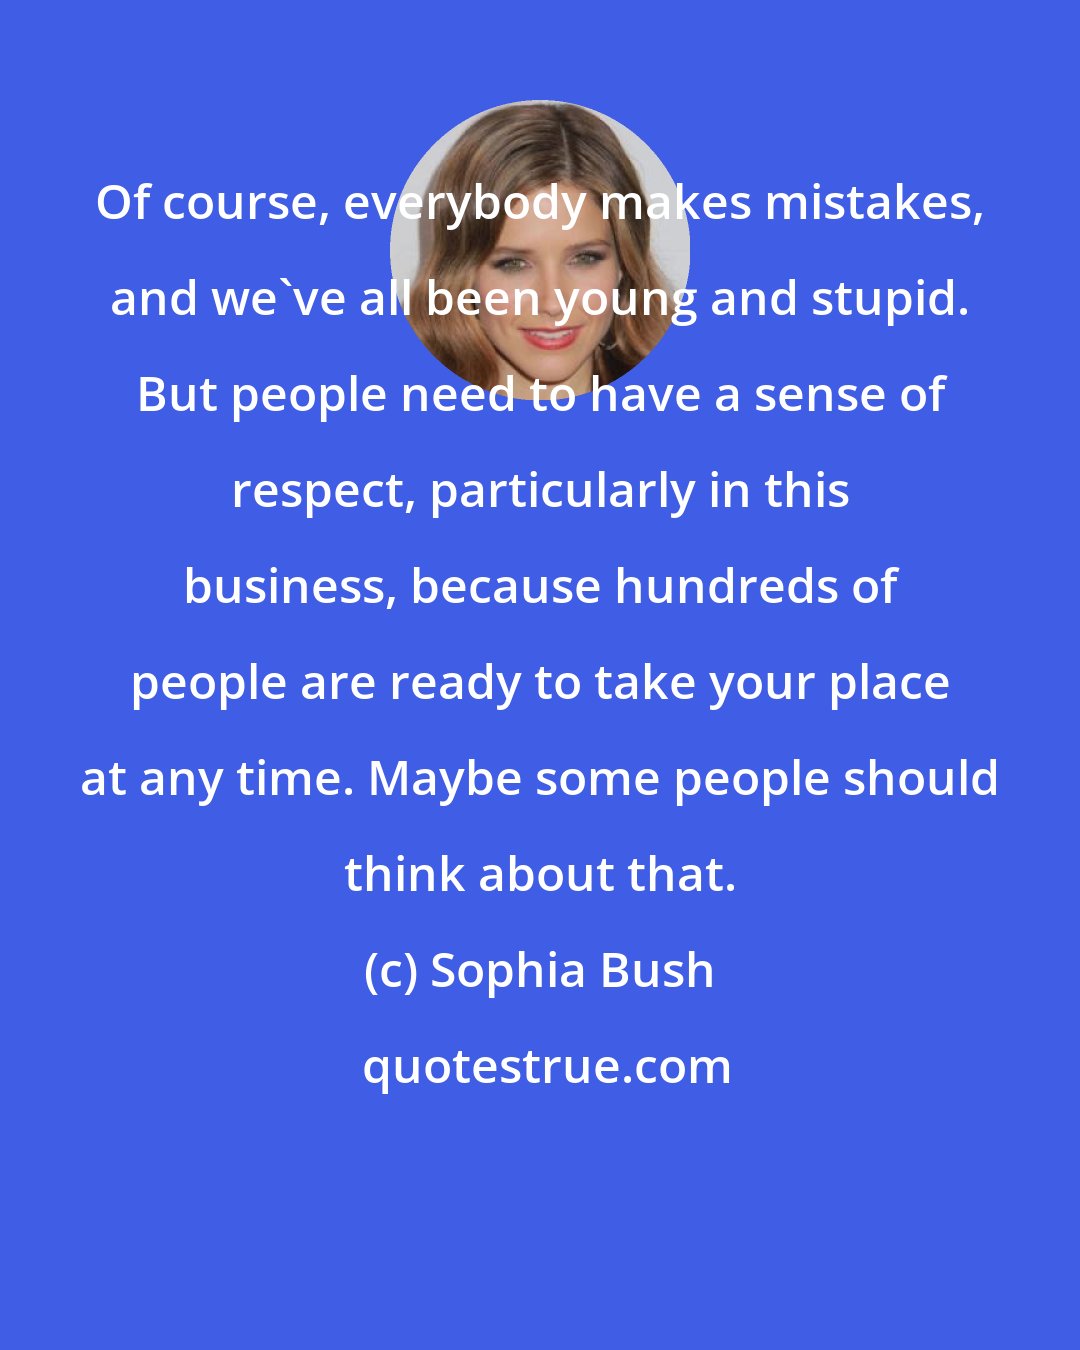 Sophia Bush: Of course, everybody makes mistakes, and we've all been young and stupid. But people need to have a sense of respect, particularly in this business, because hundreds of people are ready to take your place at any time. Maybe some people should think about that.